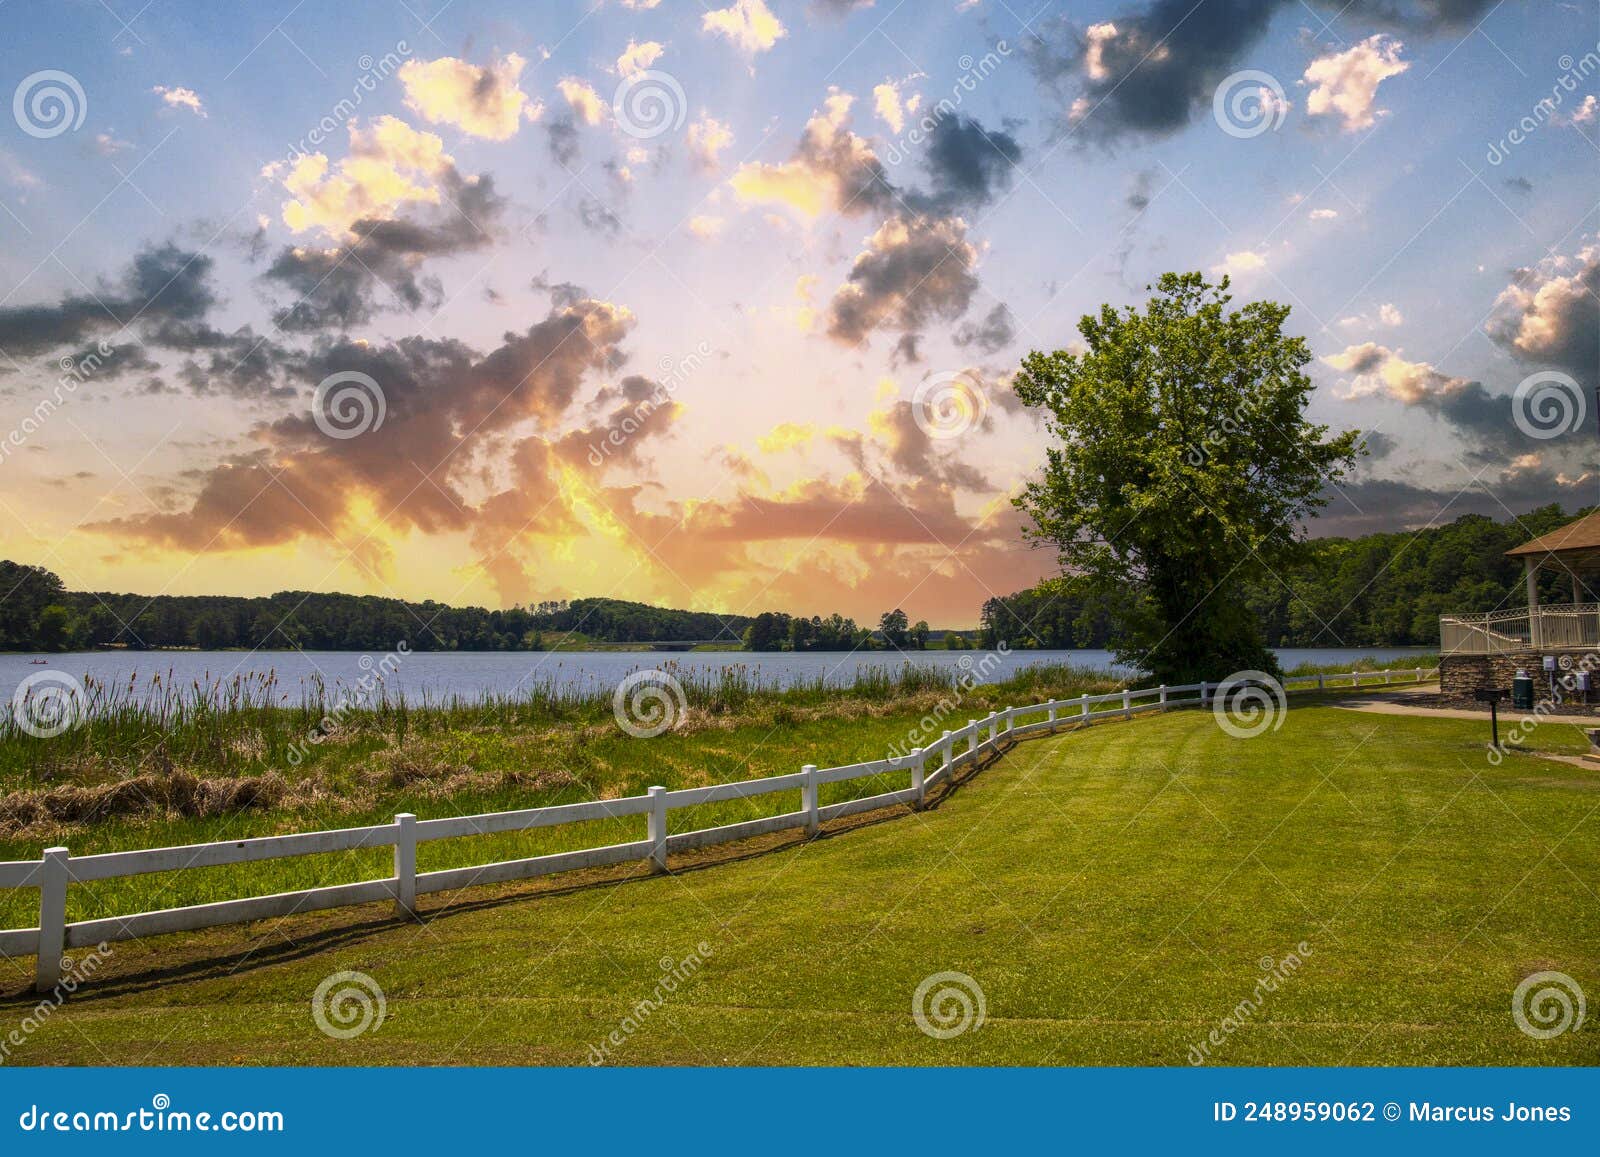 A Gorgeous Summer Landscape At Lake Acworth With Rippling Blue Lake